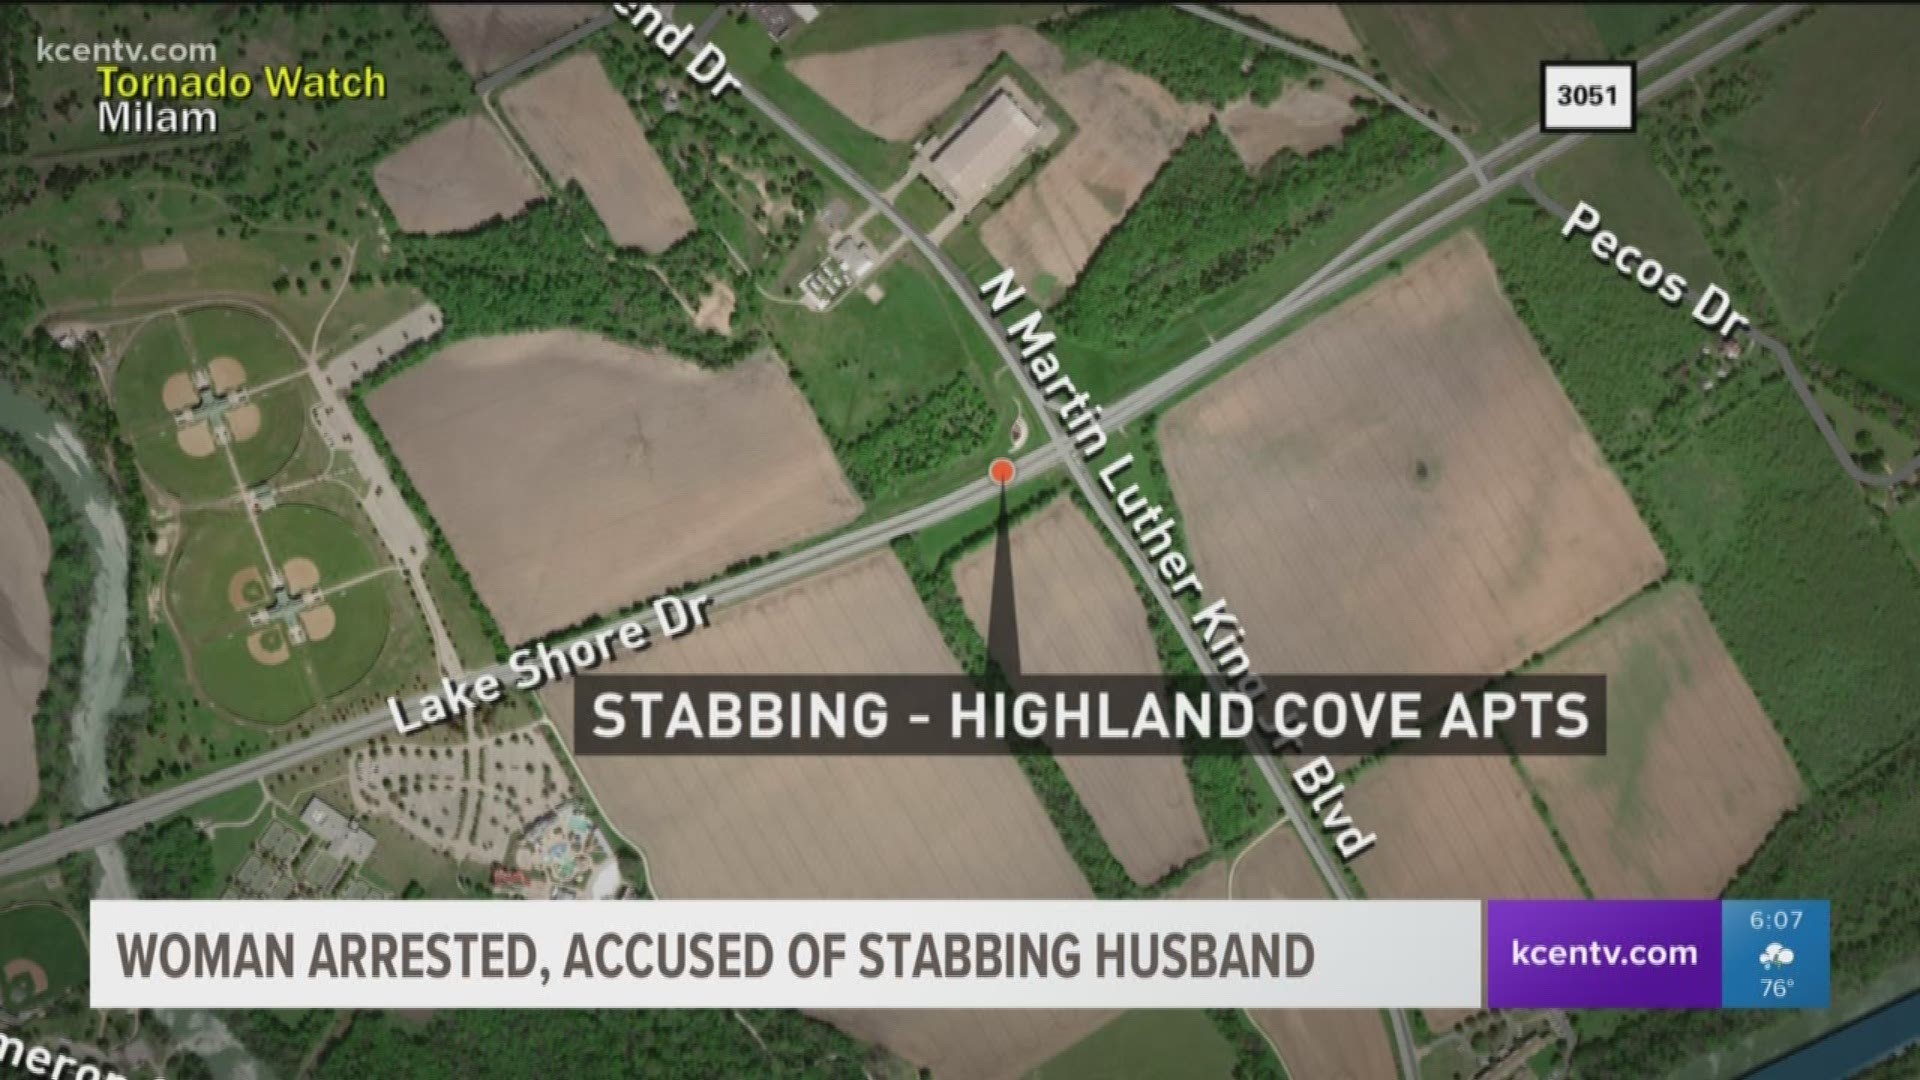 A woman is accused of stabbing her husband at the Highland Cove Apartments.